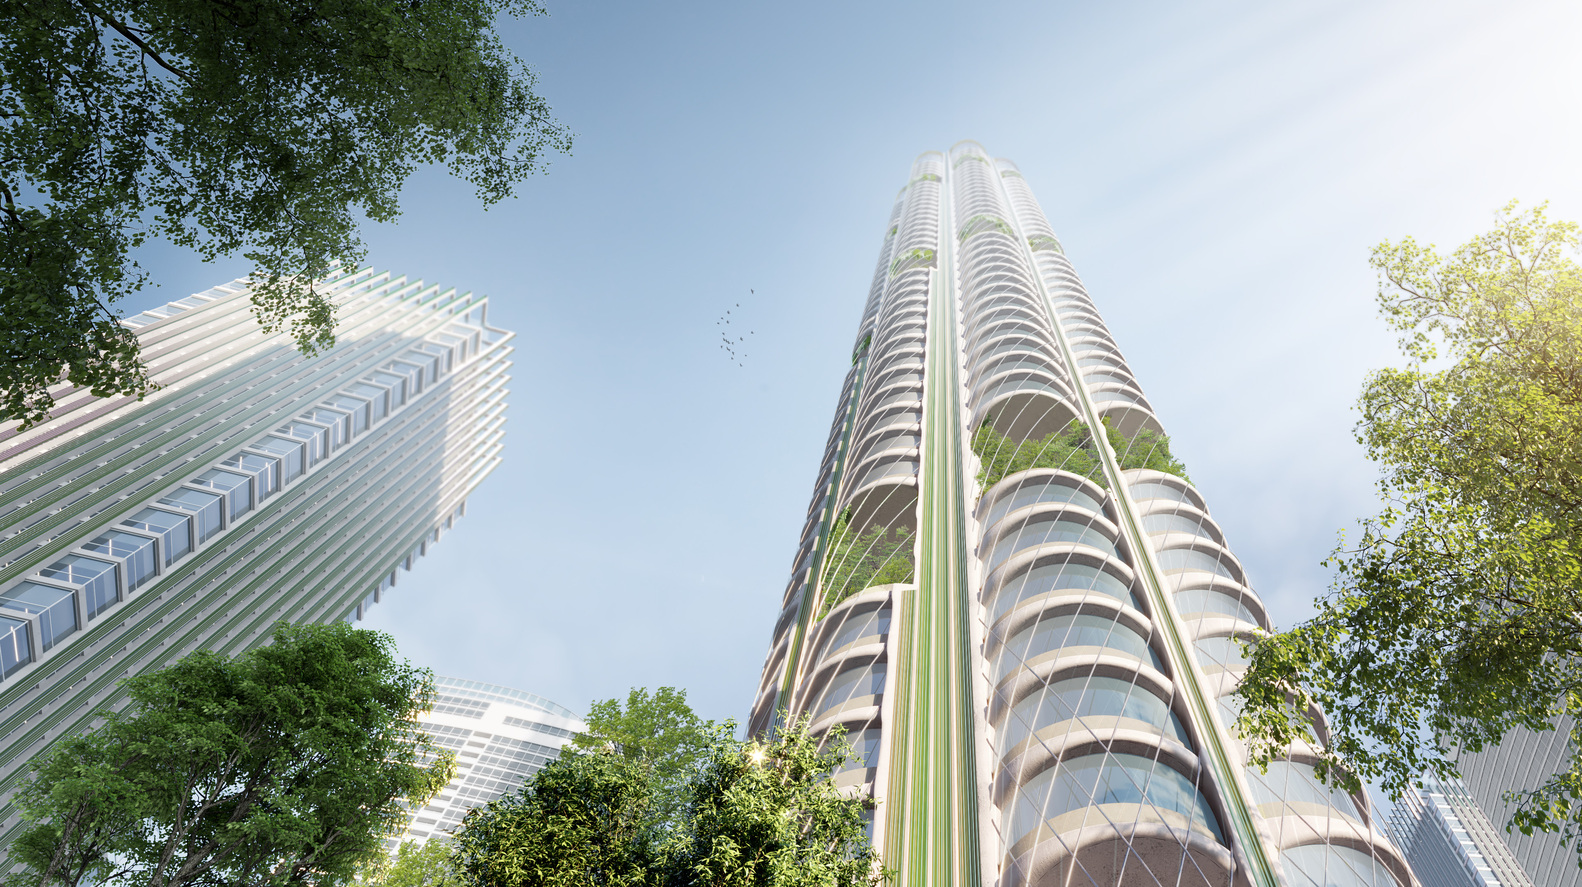 A New Carbon-Neutral City Standard Set By Urban Sequoia